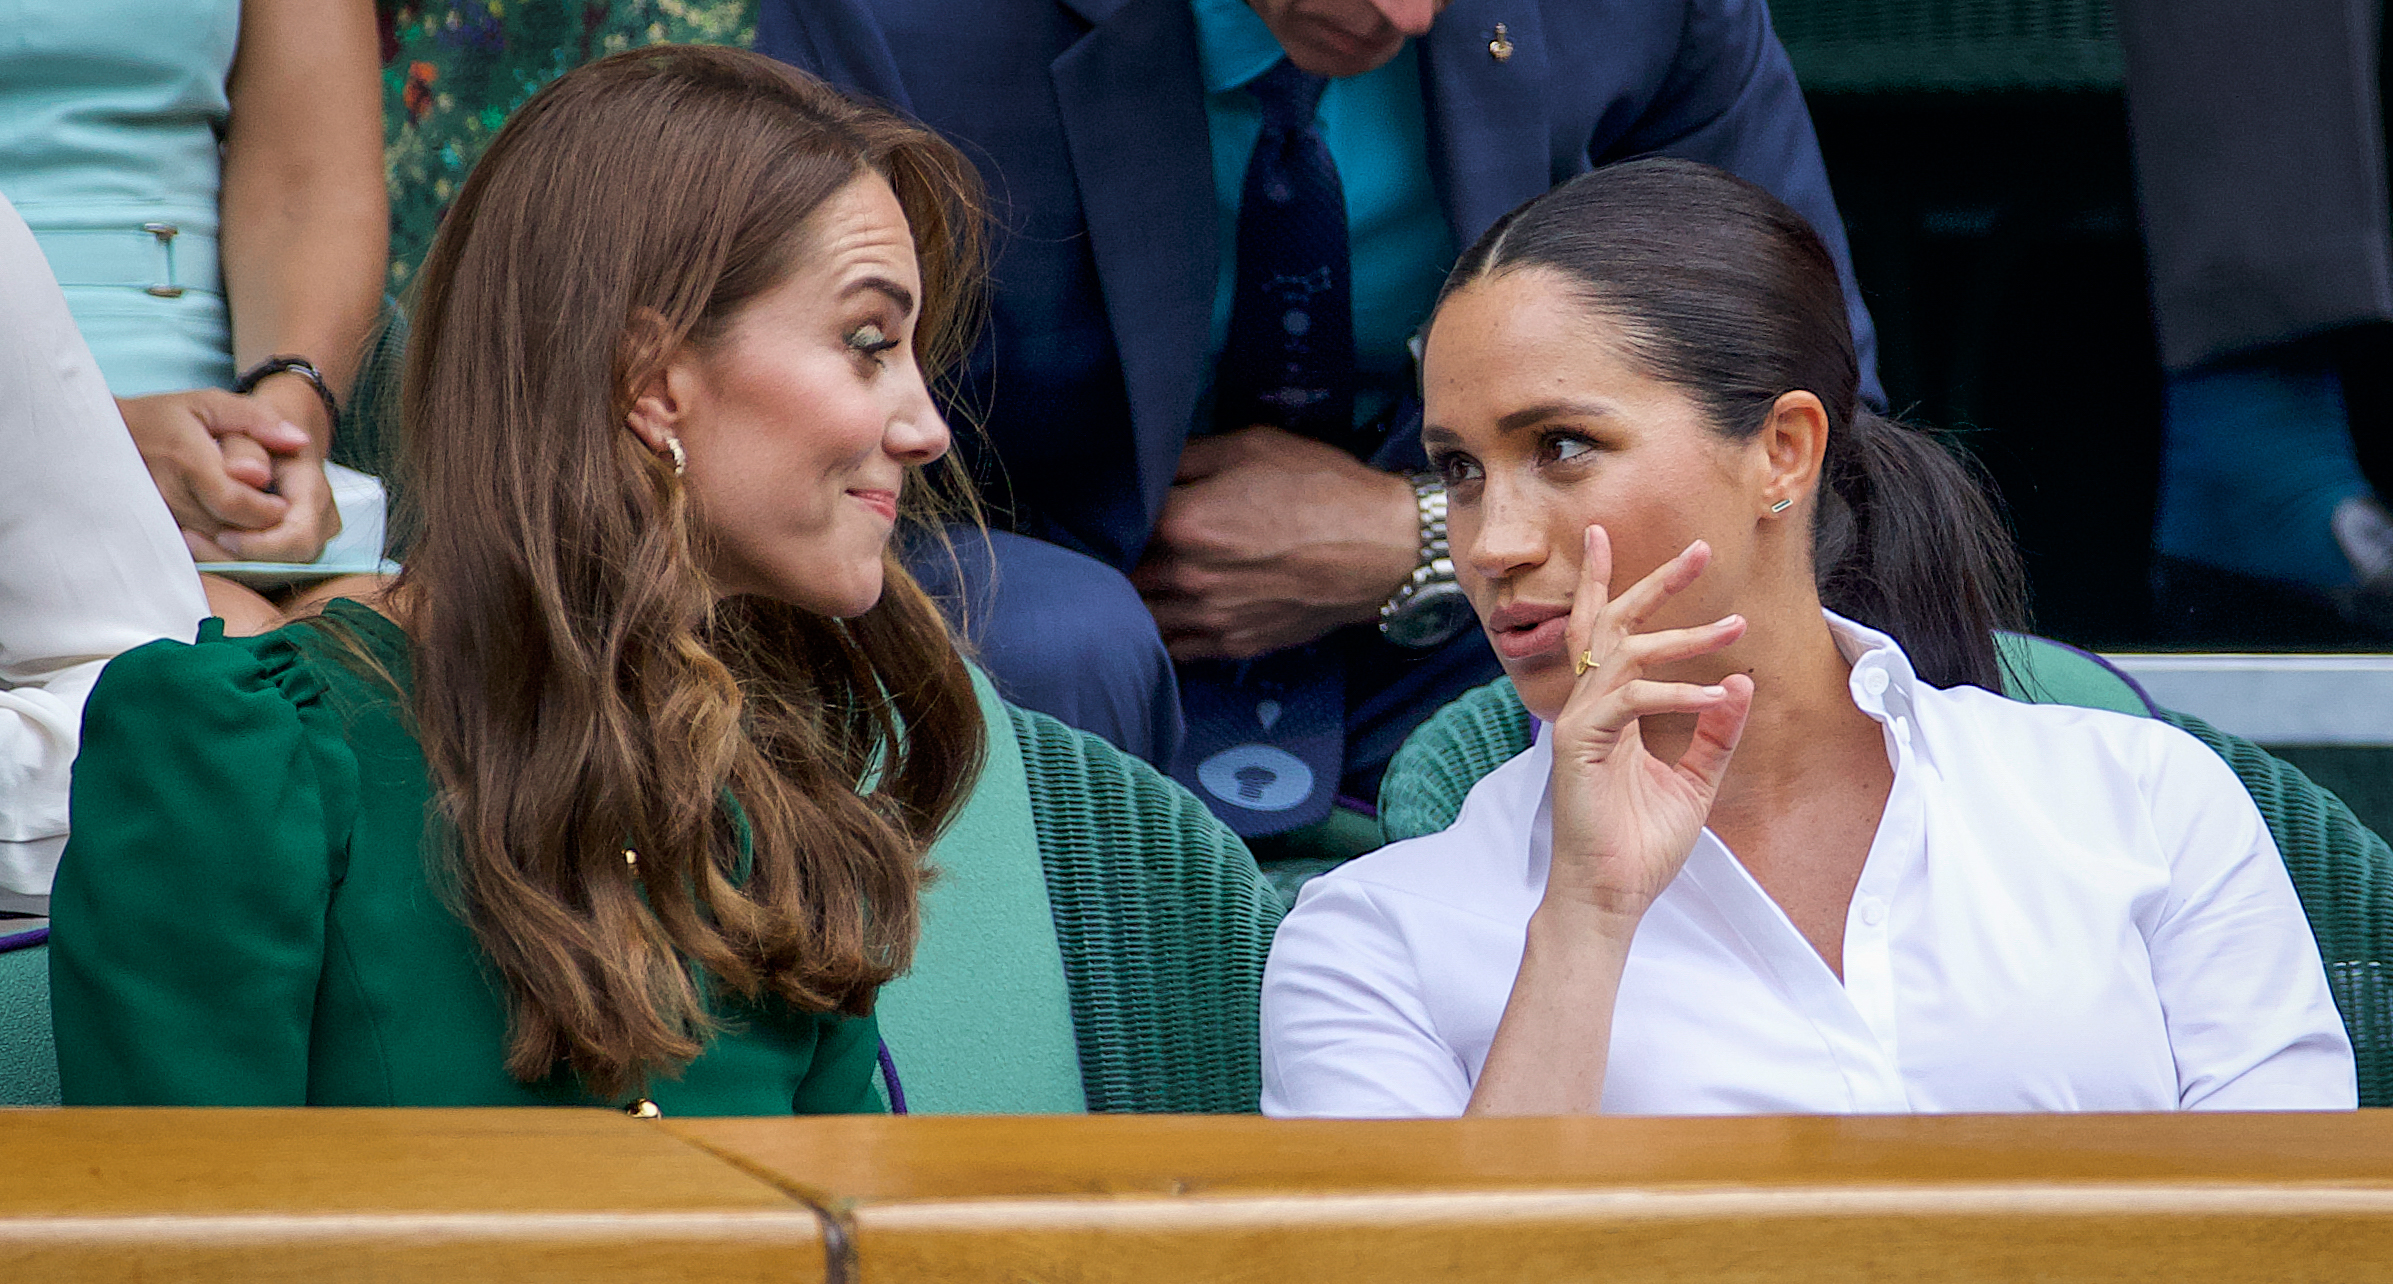 Prinzessin Catherine und Meghan Markle in Wimbledon 2019 im All England Lawn Tennis and Croquet Club am 13. Juli 2019 in London, England | Quelle: Getty Images